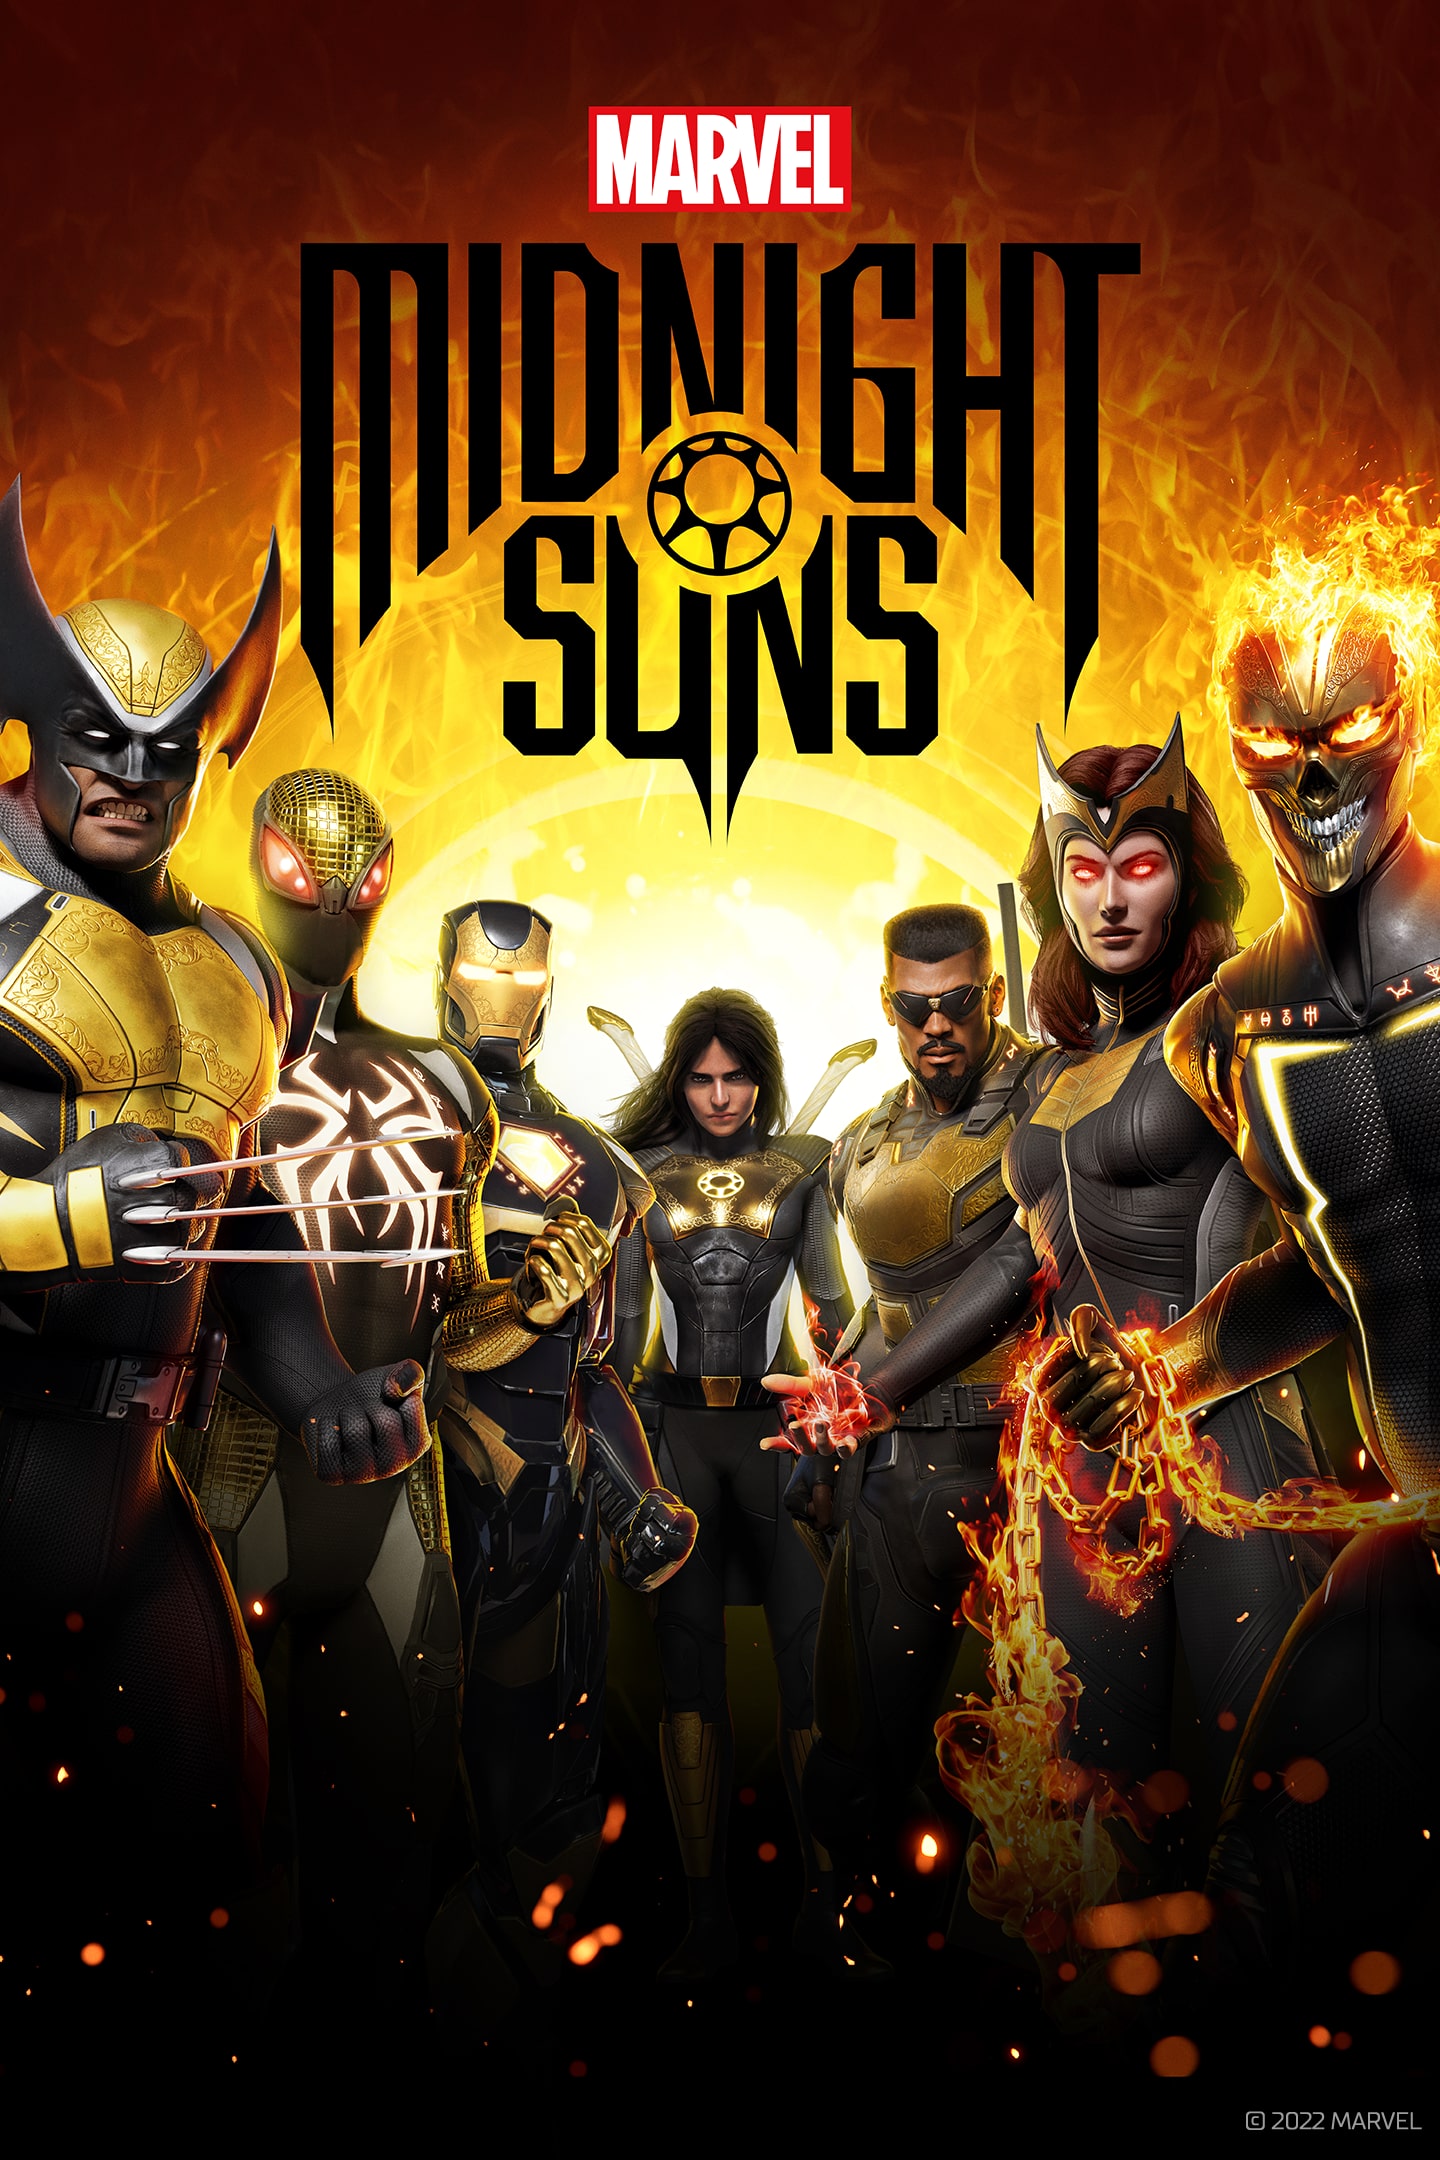 Marvel's Midnight Suns - Redemption for PS4™